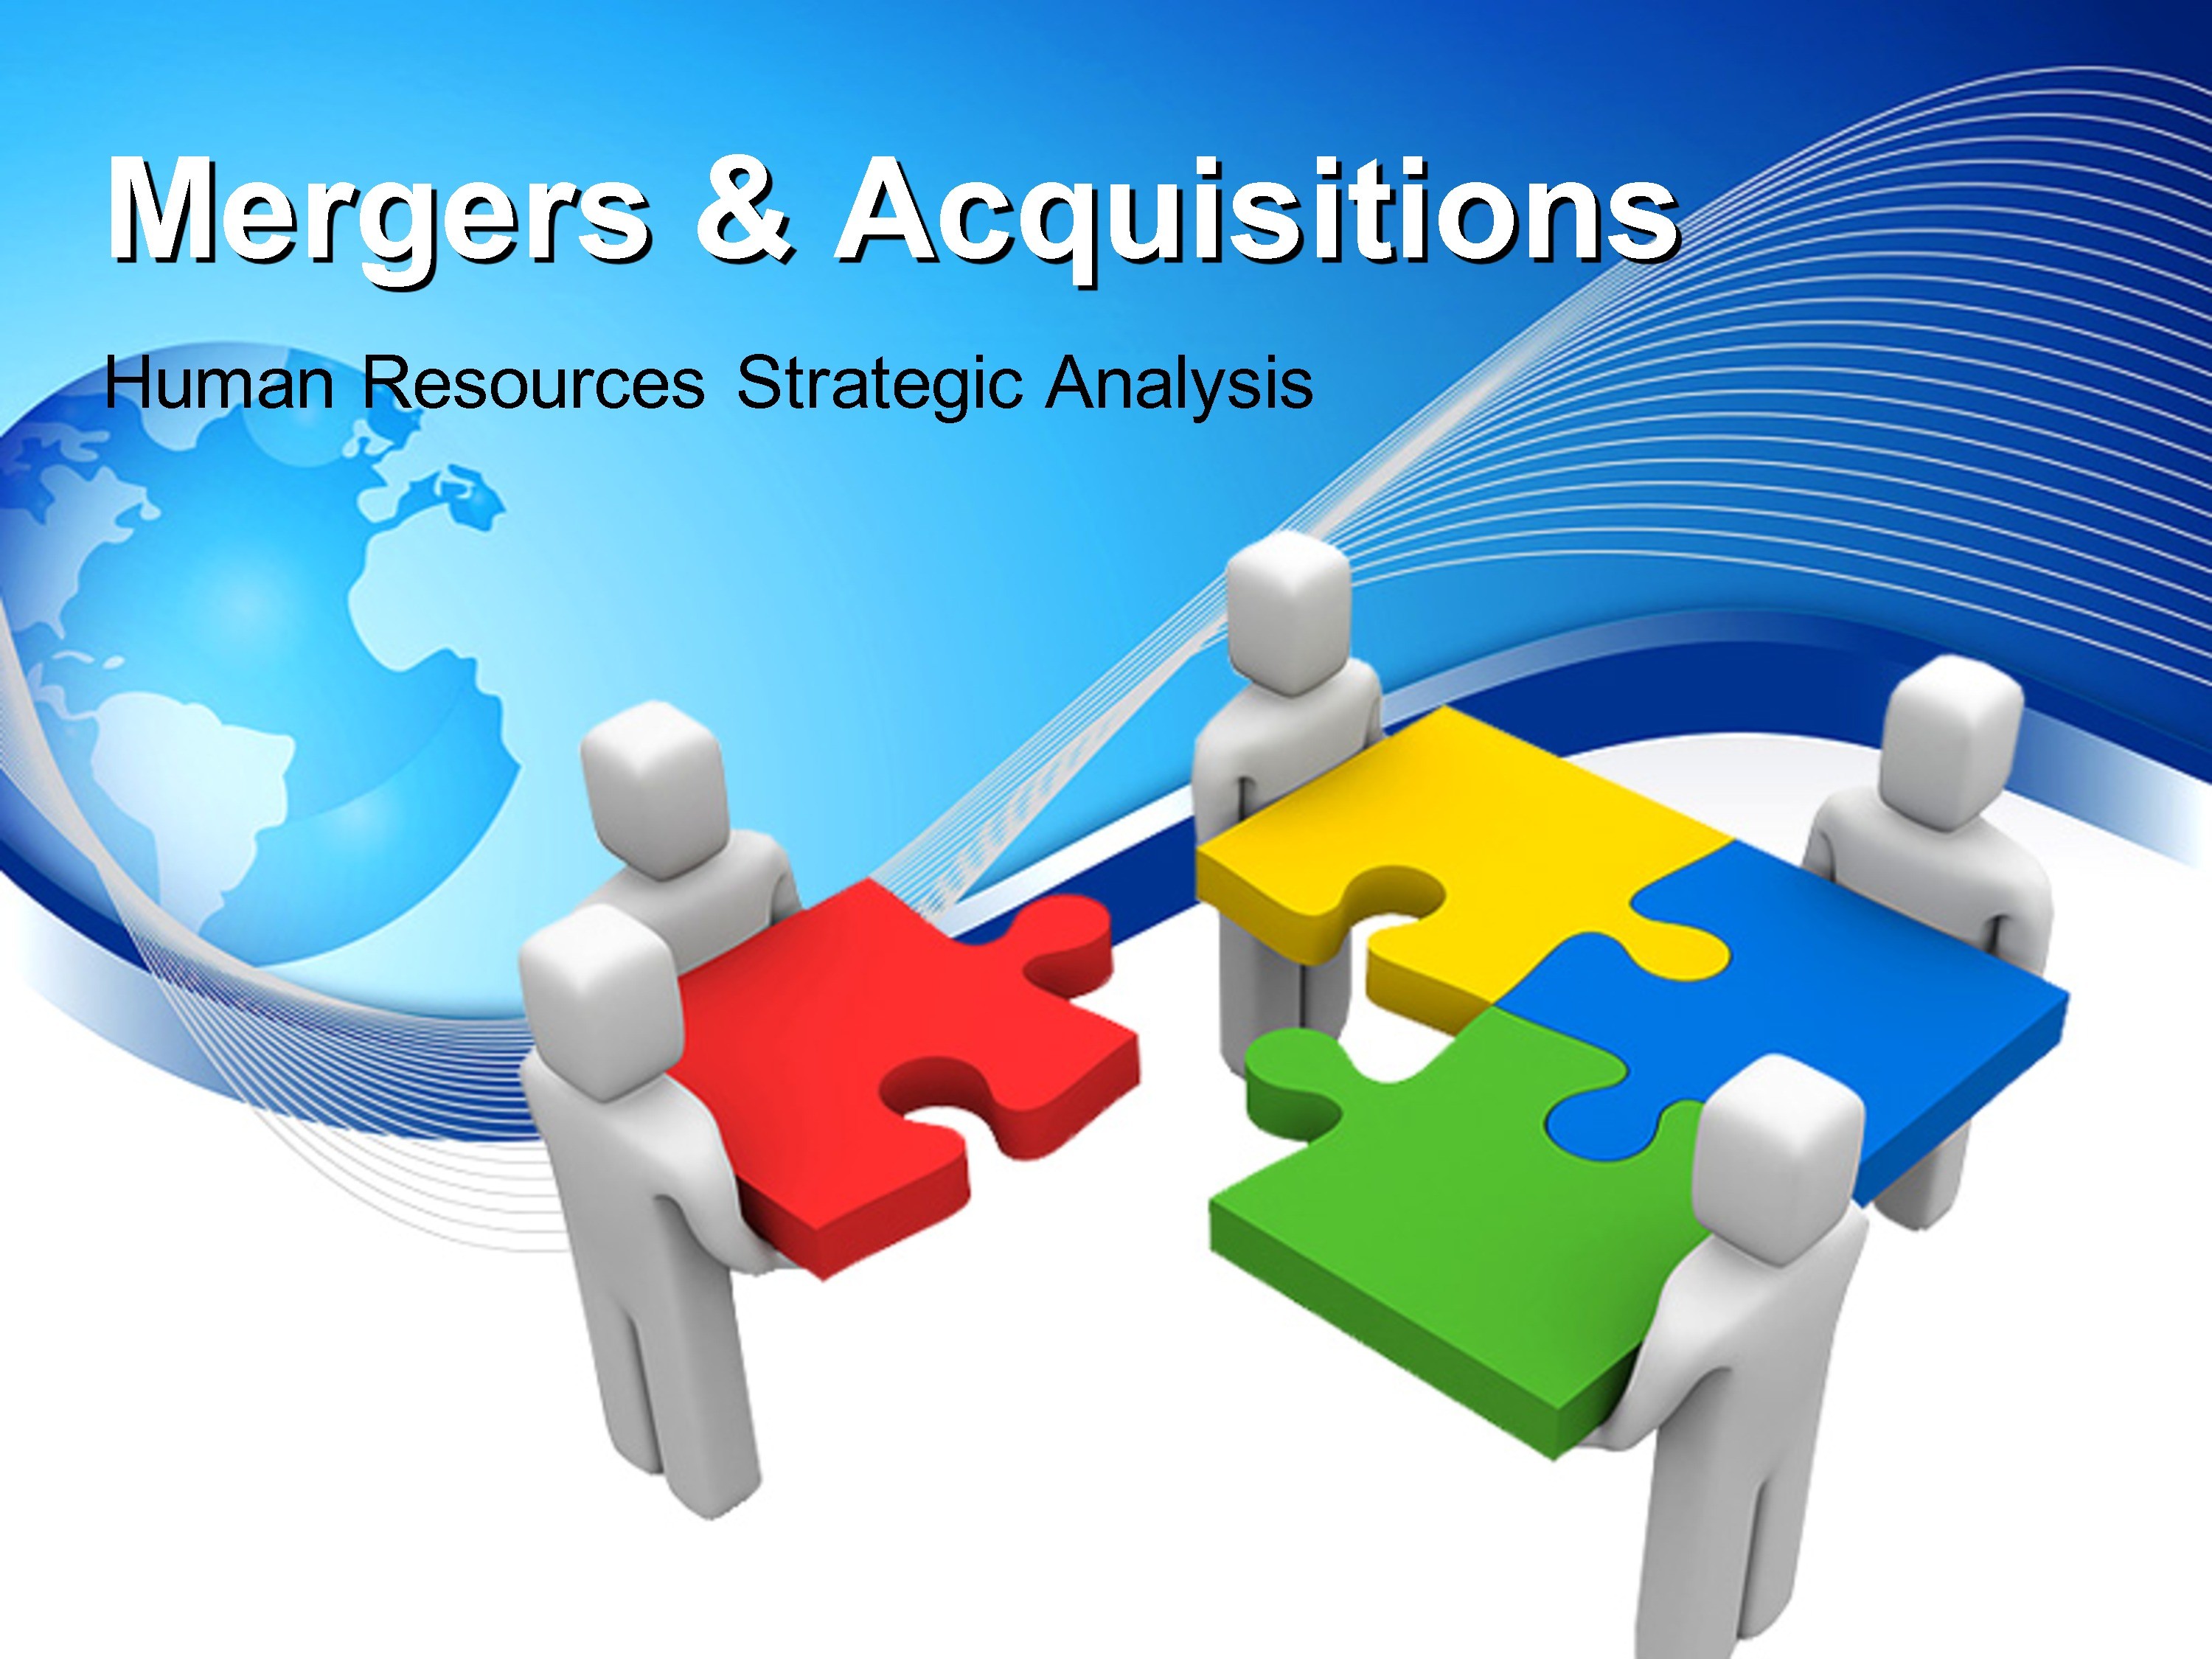 Mergers & Acquisitions - HR Strategic Analysis